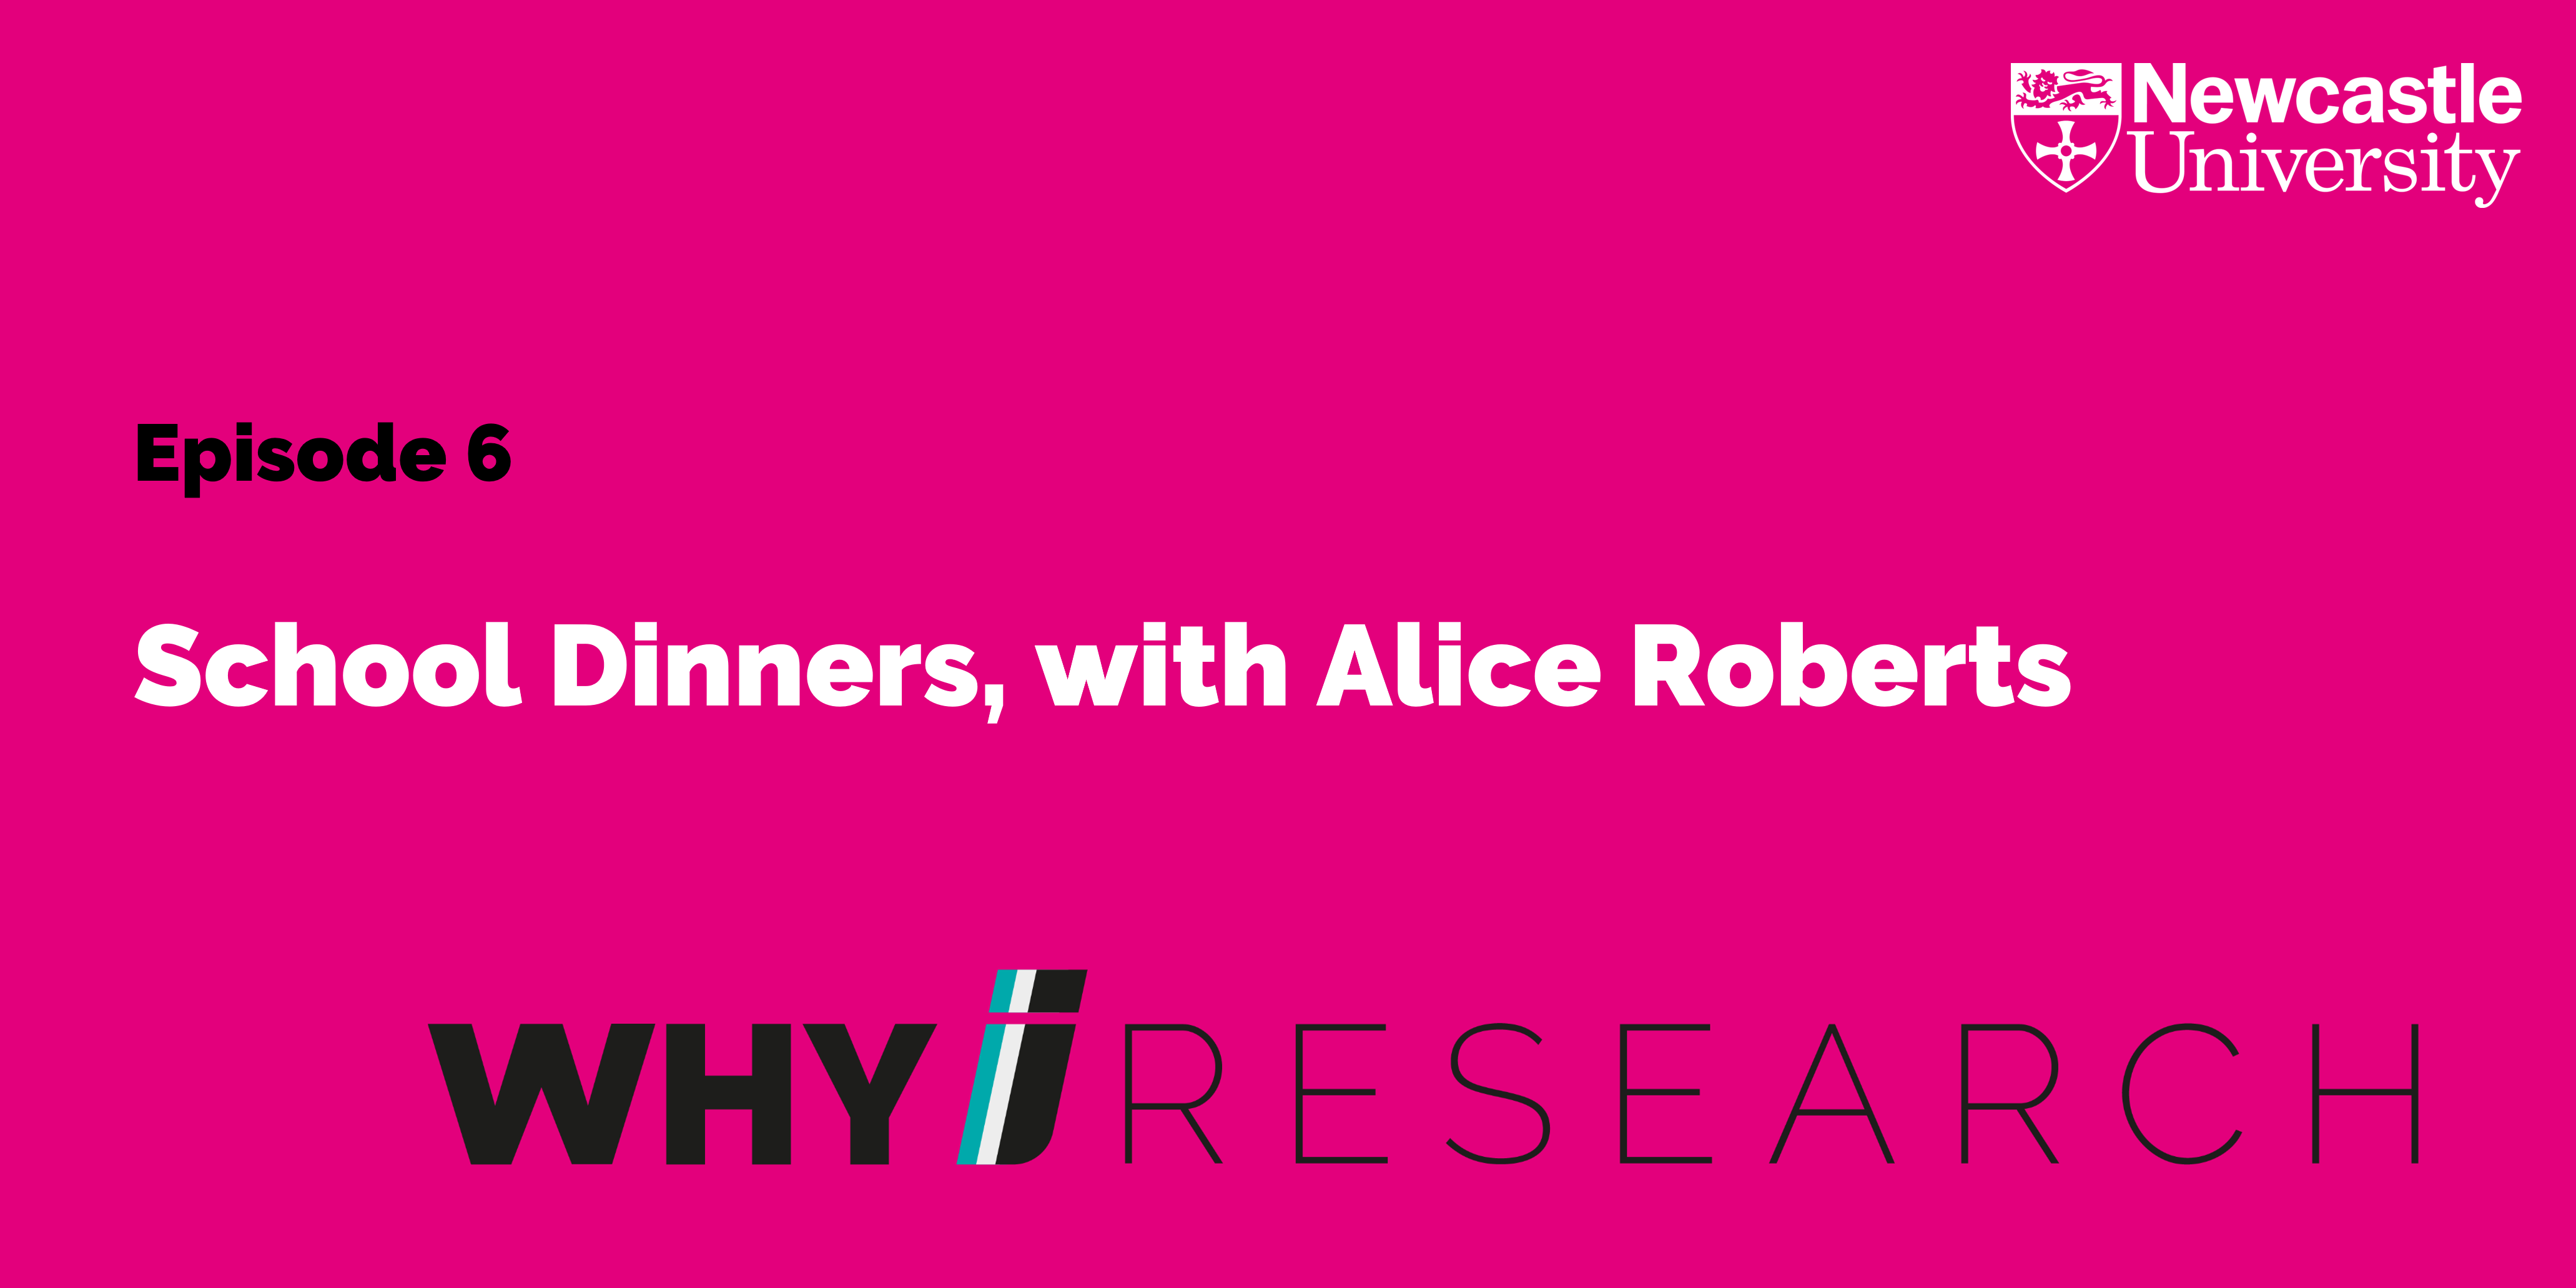 School Dinners with Alice Roberts - Why I Research Podcast